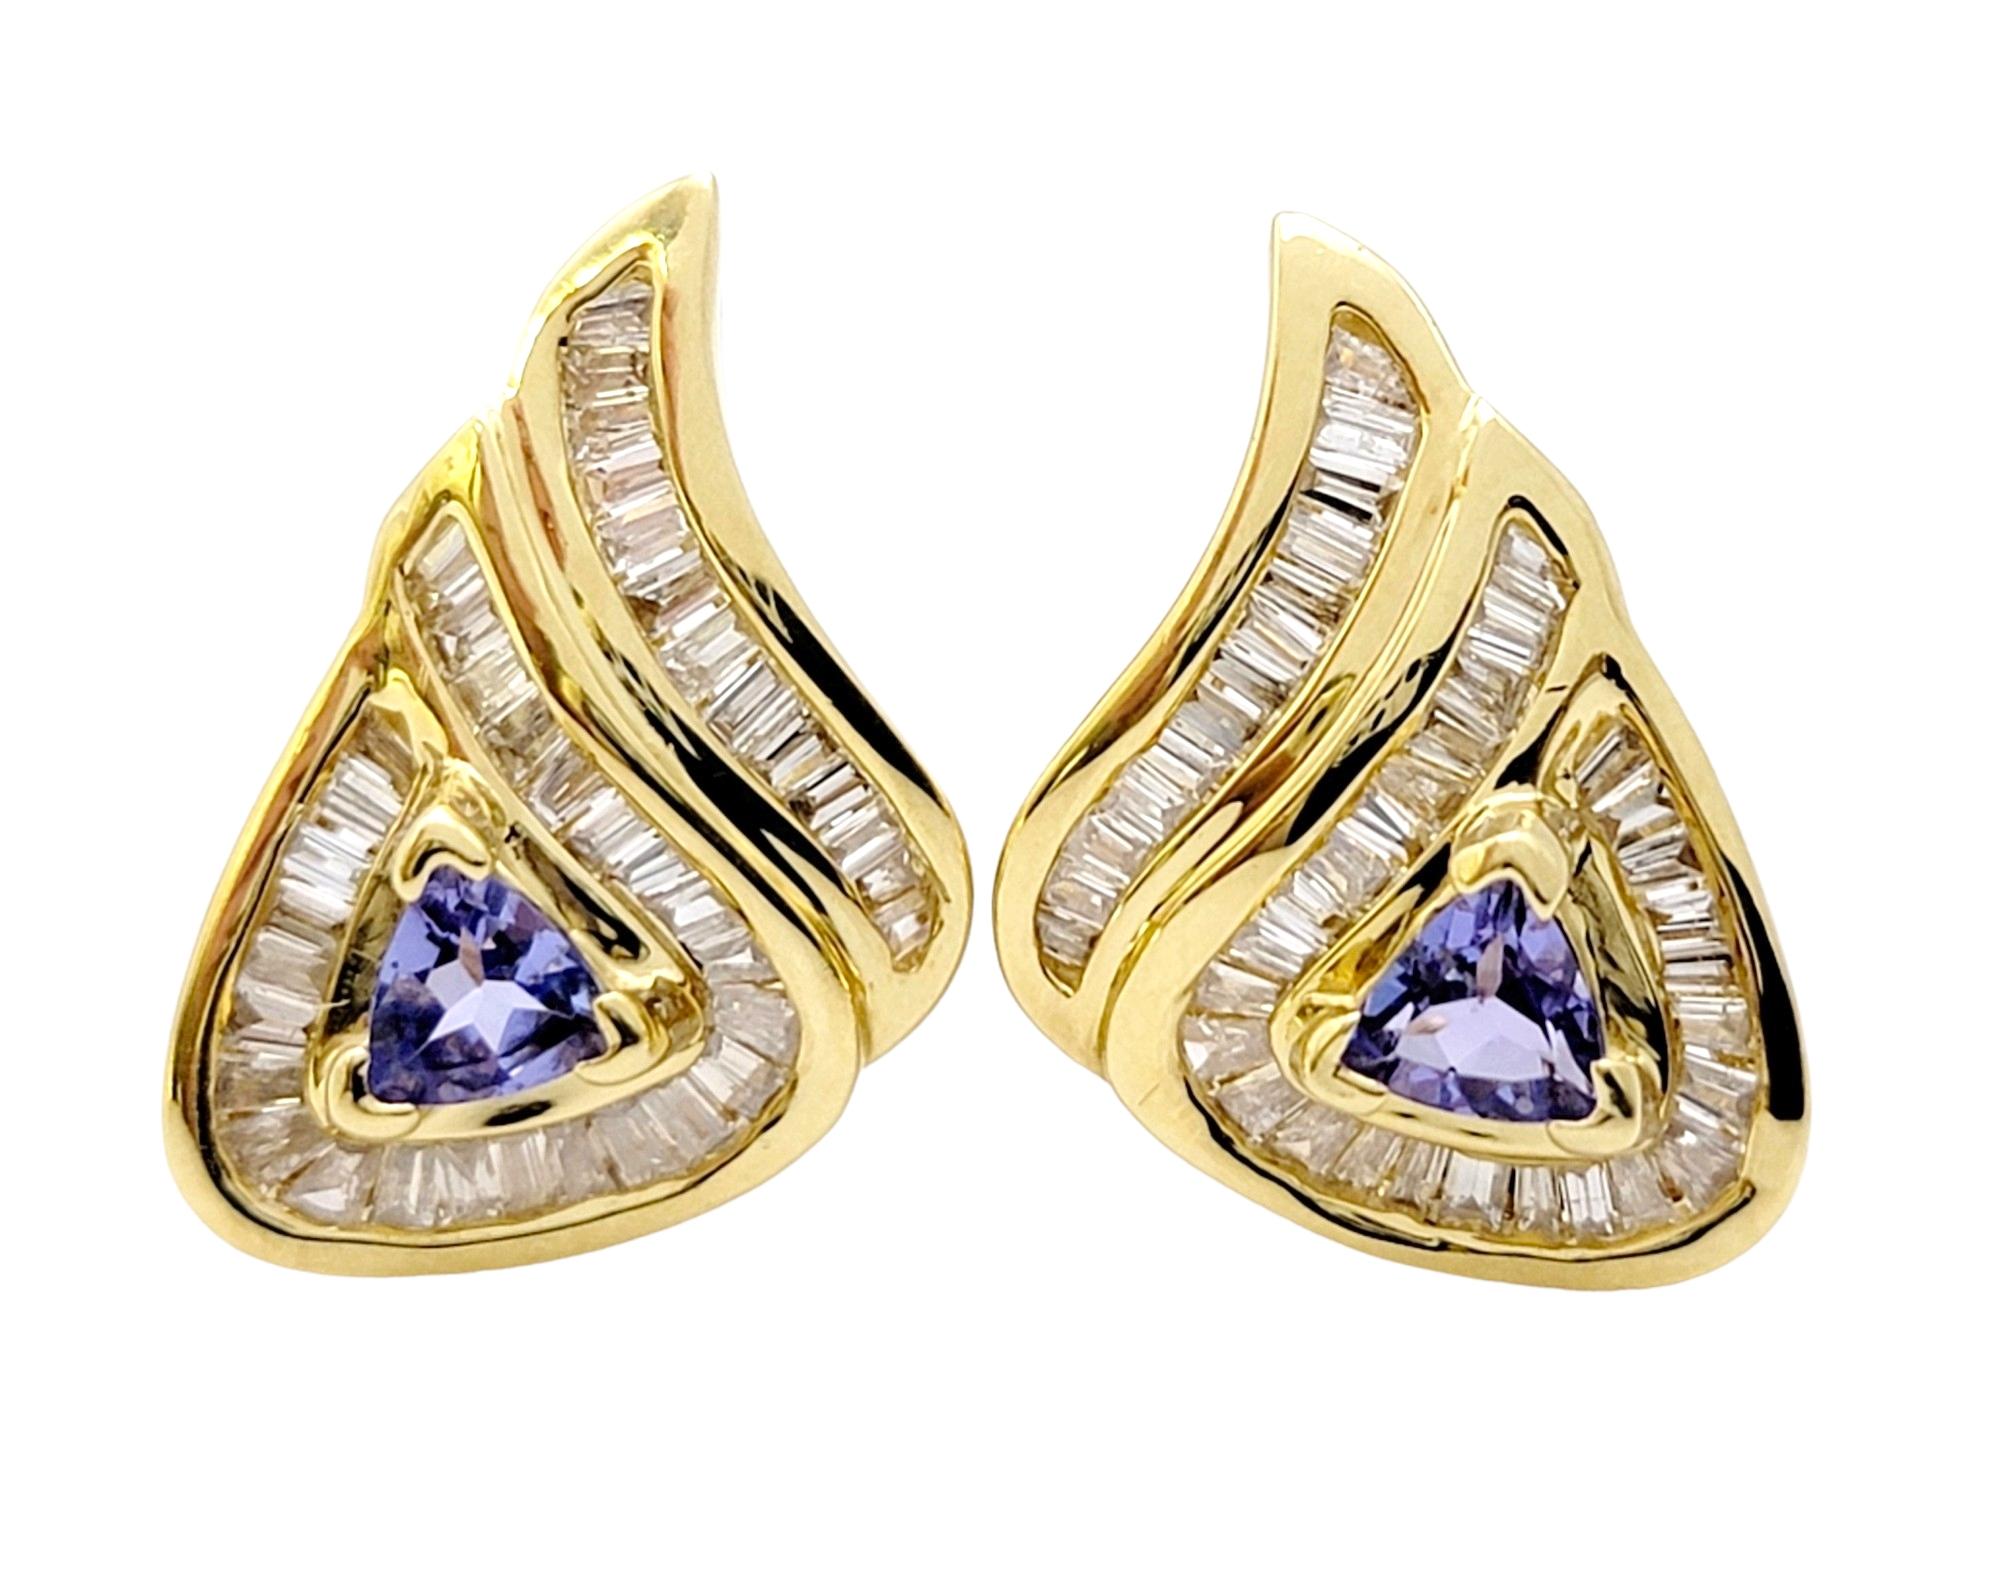 These dazzling, contemporary tanzanite and diamond teardrop earrings absolutely radiate on the ear. Exuding opulence and sophistication, they make a stunning addition to any jewelry lovers collection.

Each earring features a mesmerizing trillion